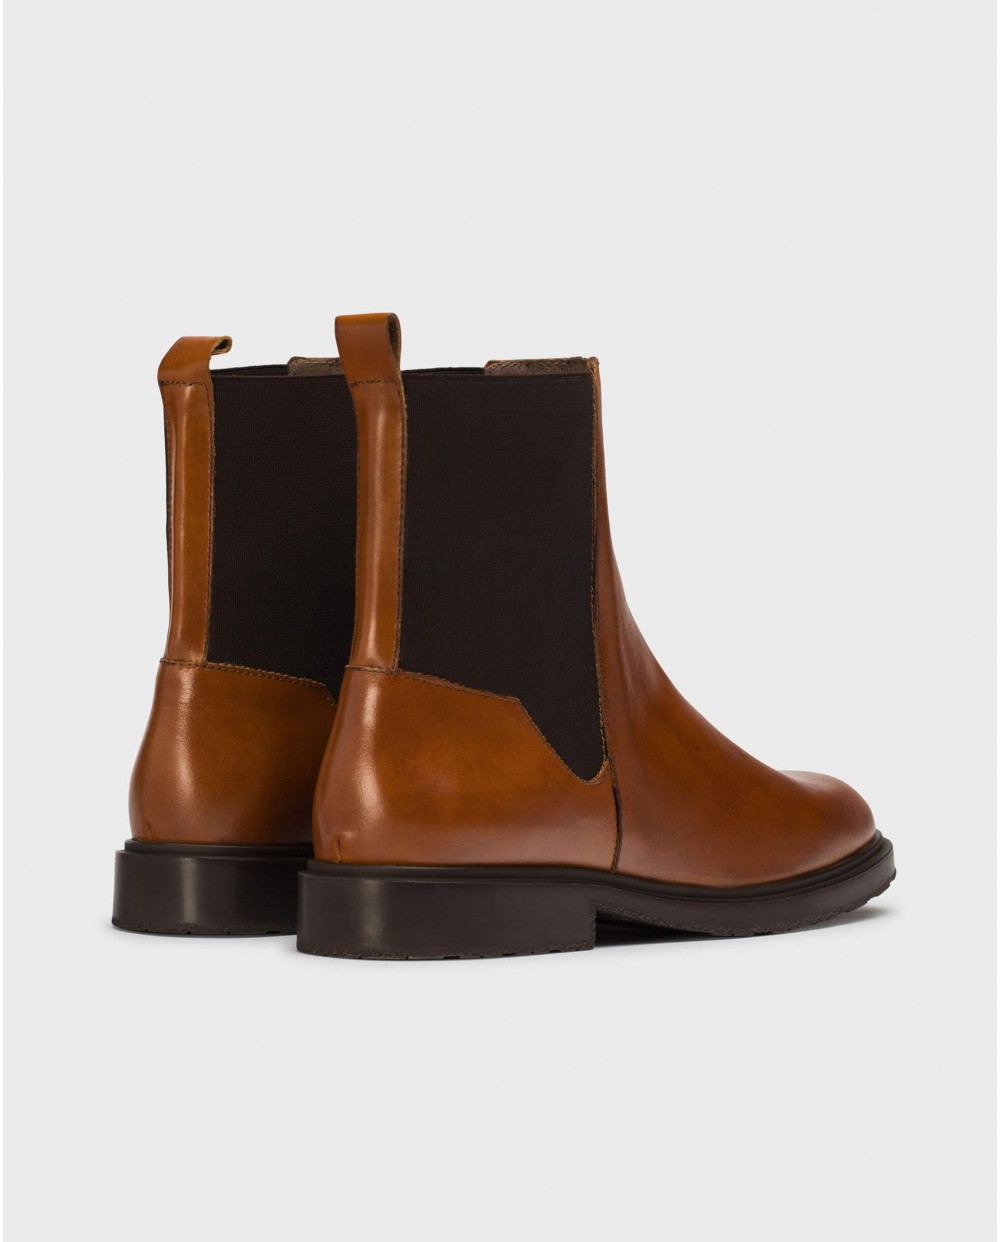 Wonders-Ankle Boots-Brown SCAR ankle boot